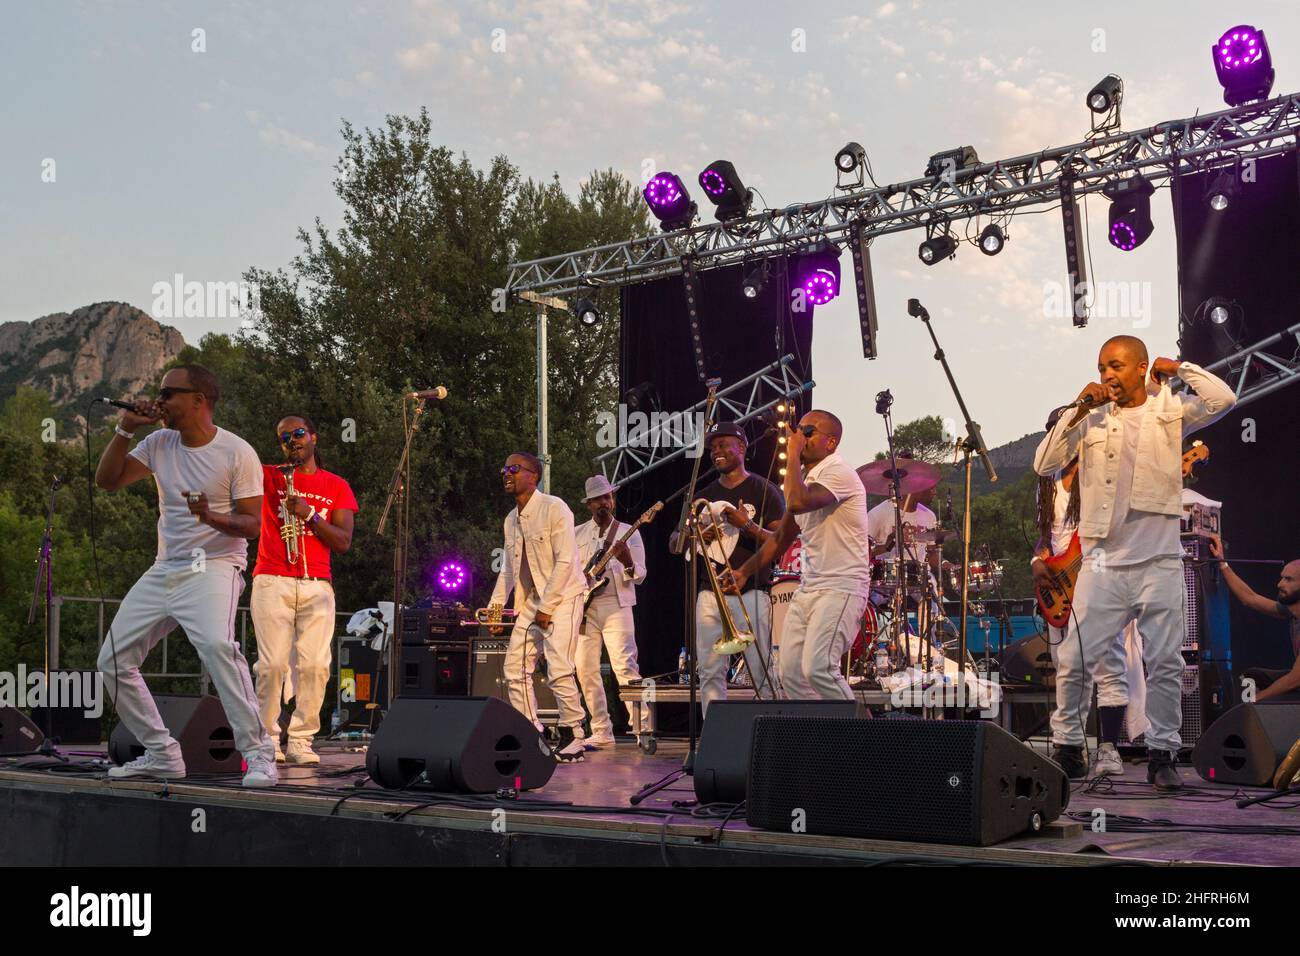 Music festival between cliffs and vineyards at the Domaine de l'Hortus. Hypnotic Brass Ensemble in concert. Valflaunes, Occitanie, France Stock Photo